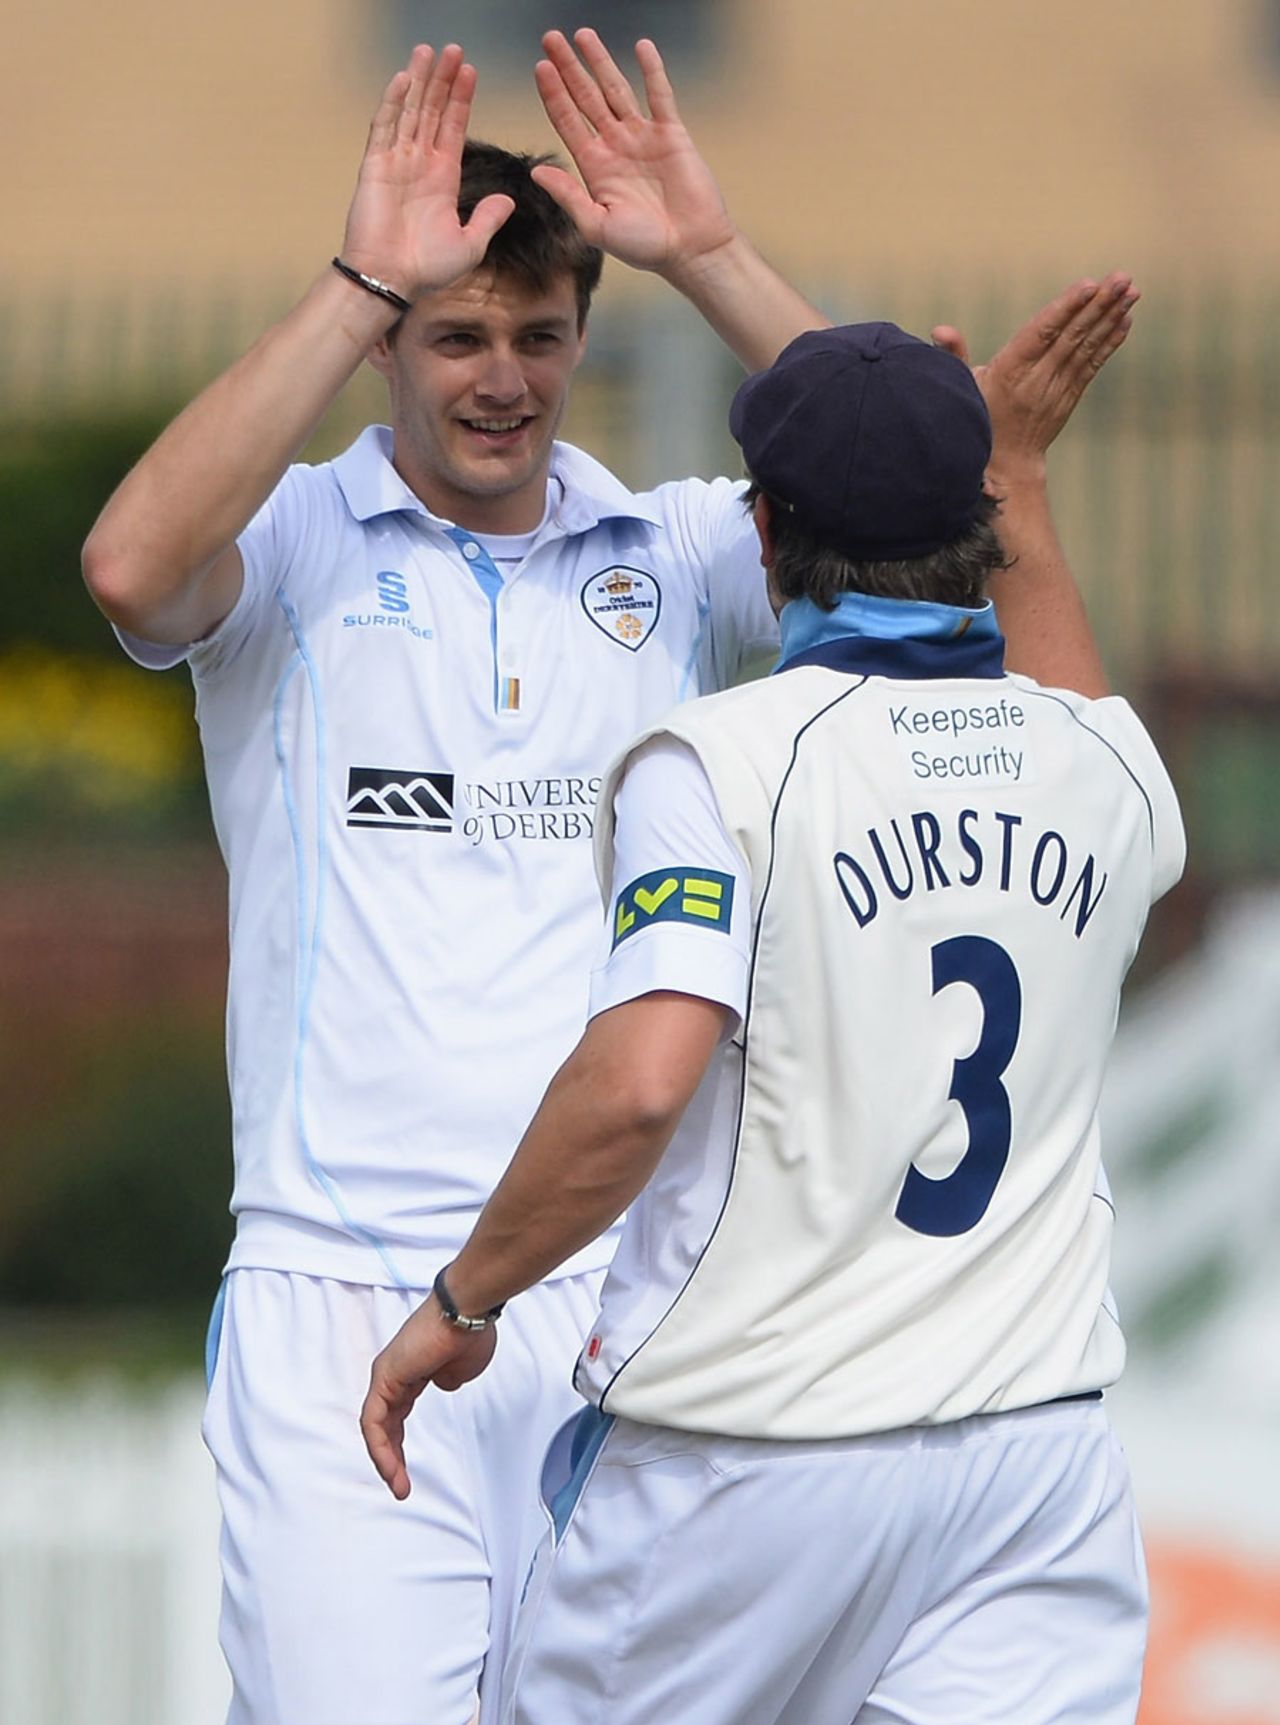 Jonathan Clare gets a high five from Wes Durston, Derbyshire v Nottinghamshire, County Championship, Division One, Derby, 2nd day, April 25, 2013